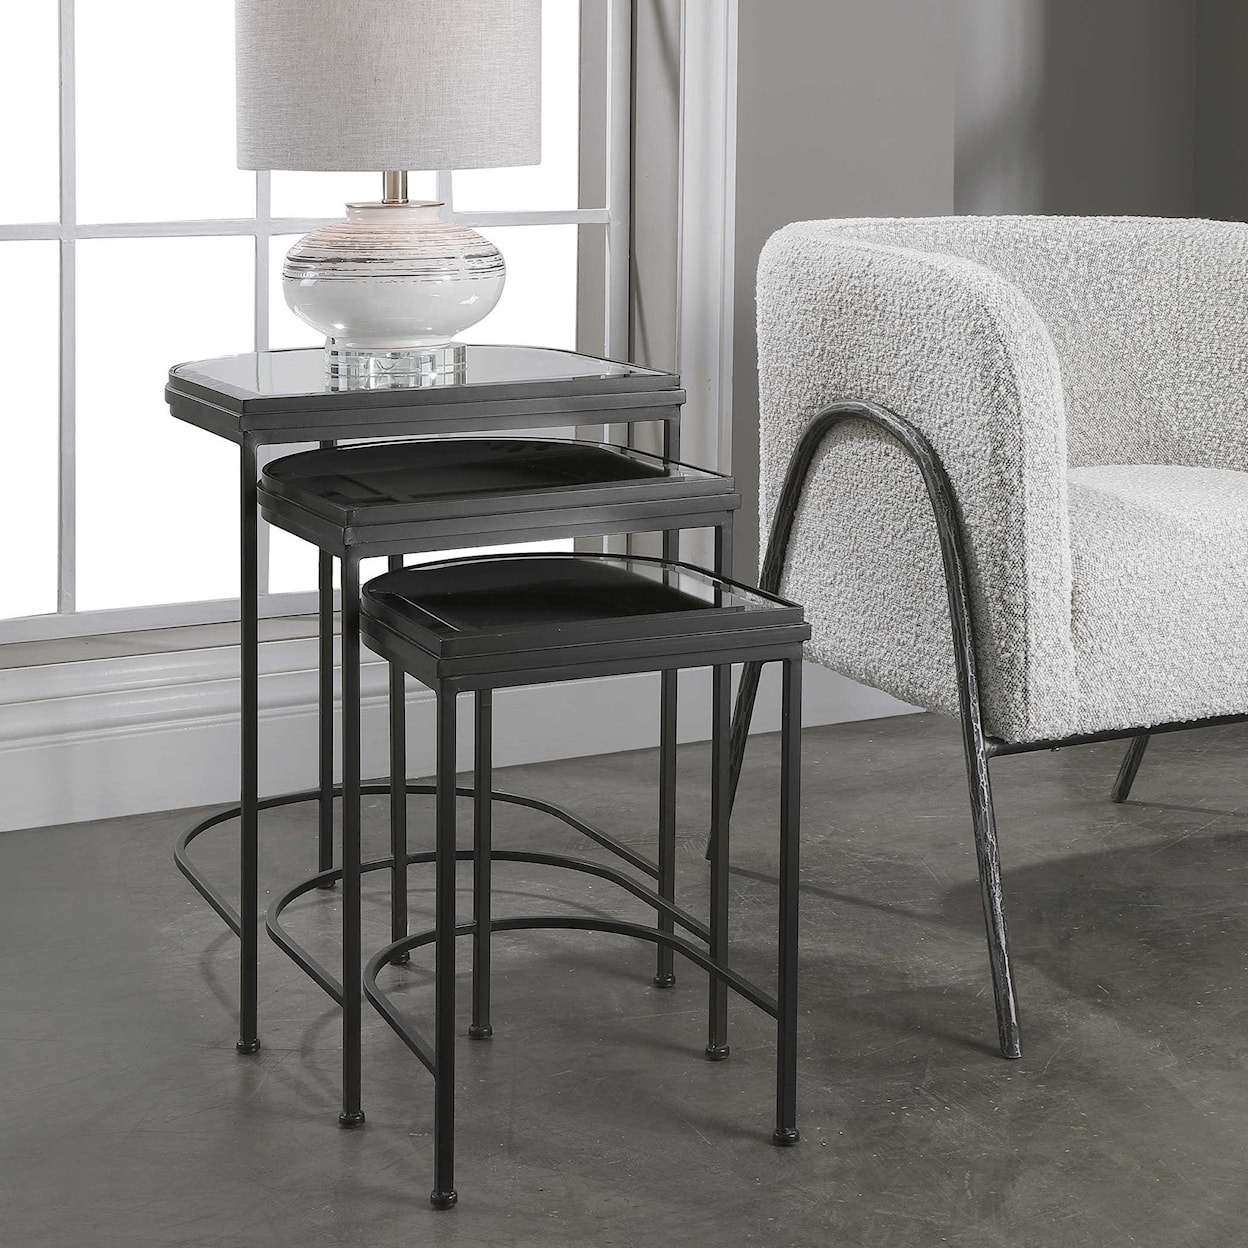 Uttermost Accent Furniture - Occasional Tables Black Nesting Tables, S/3